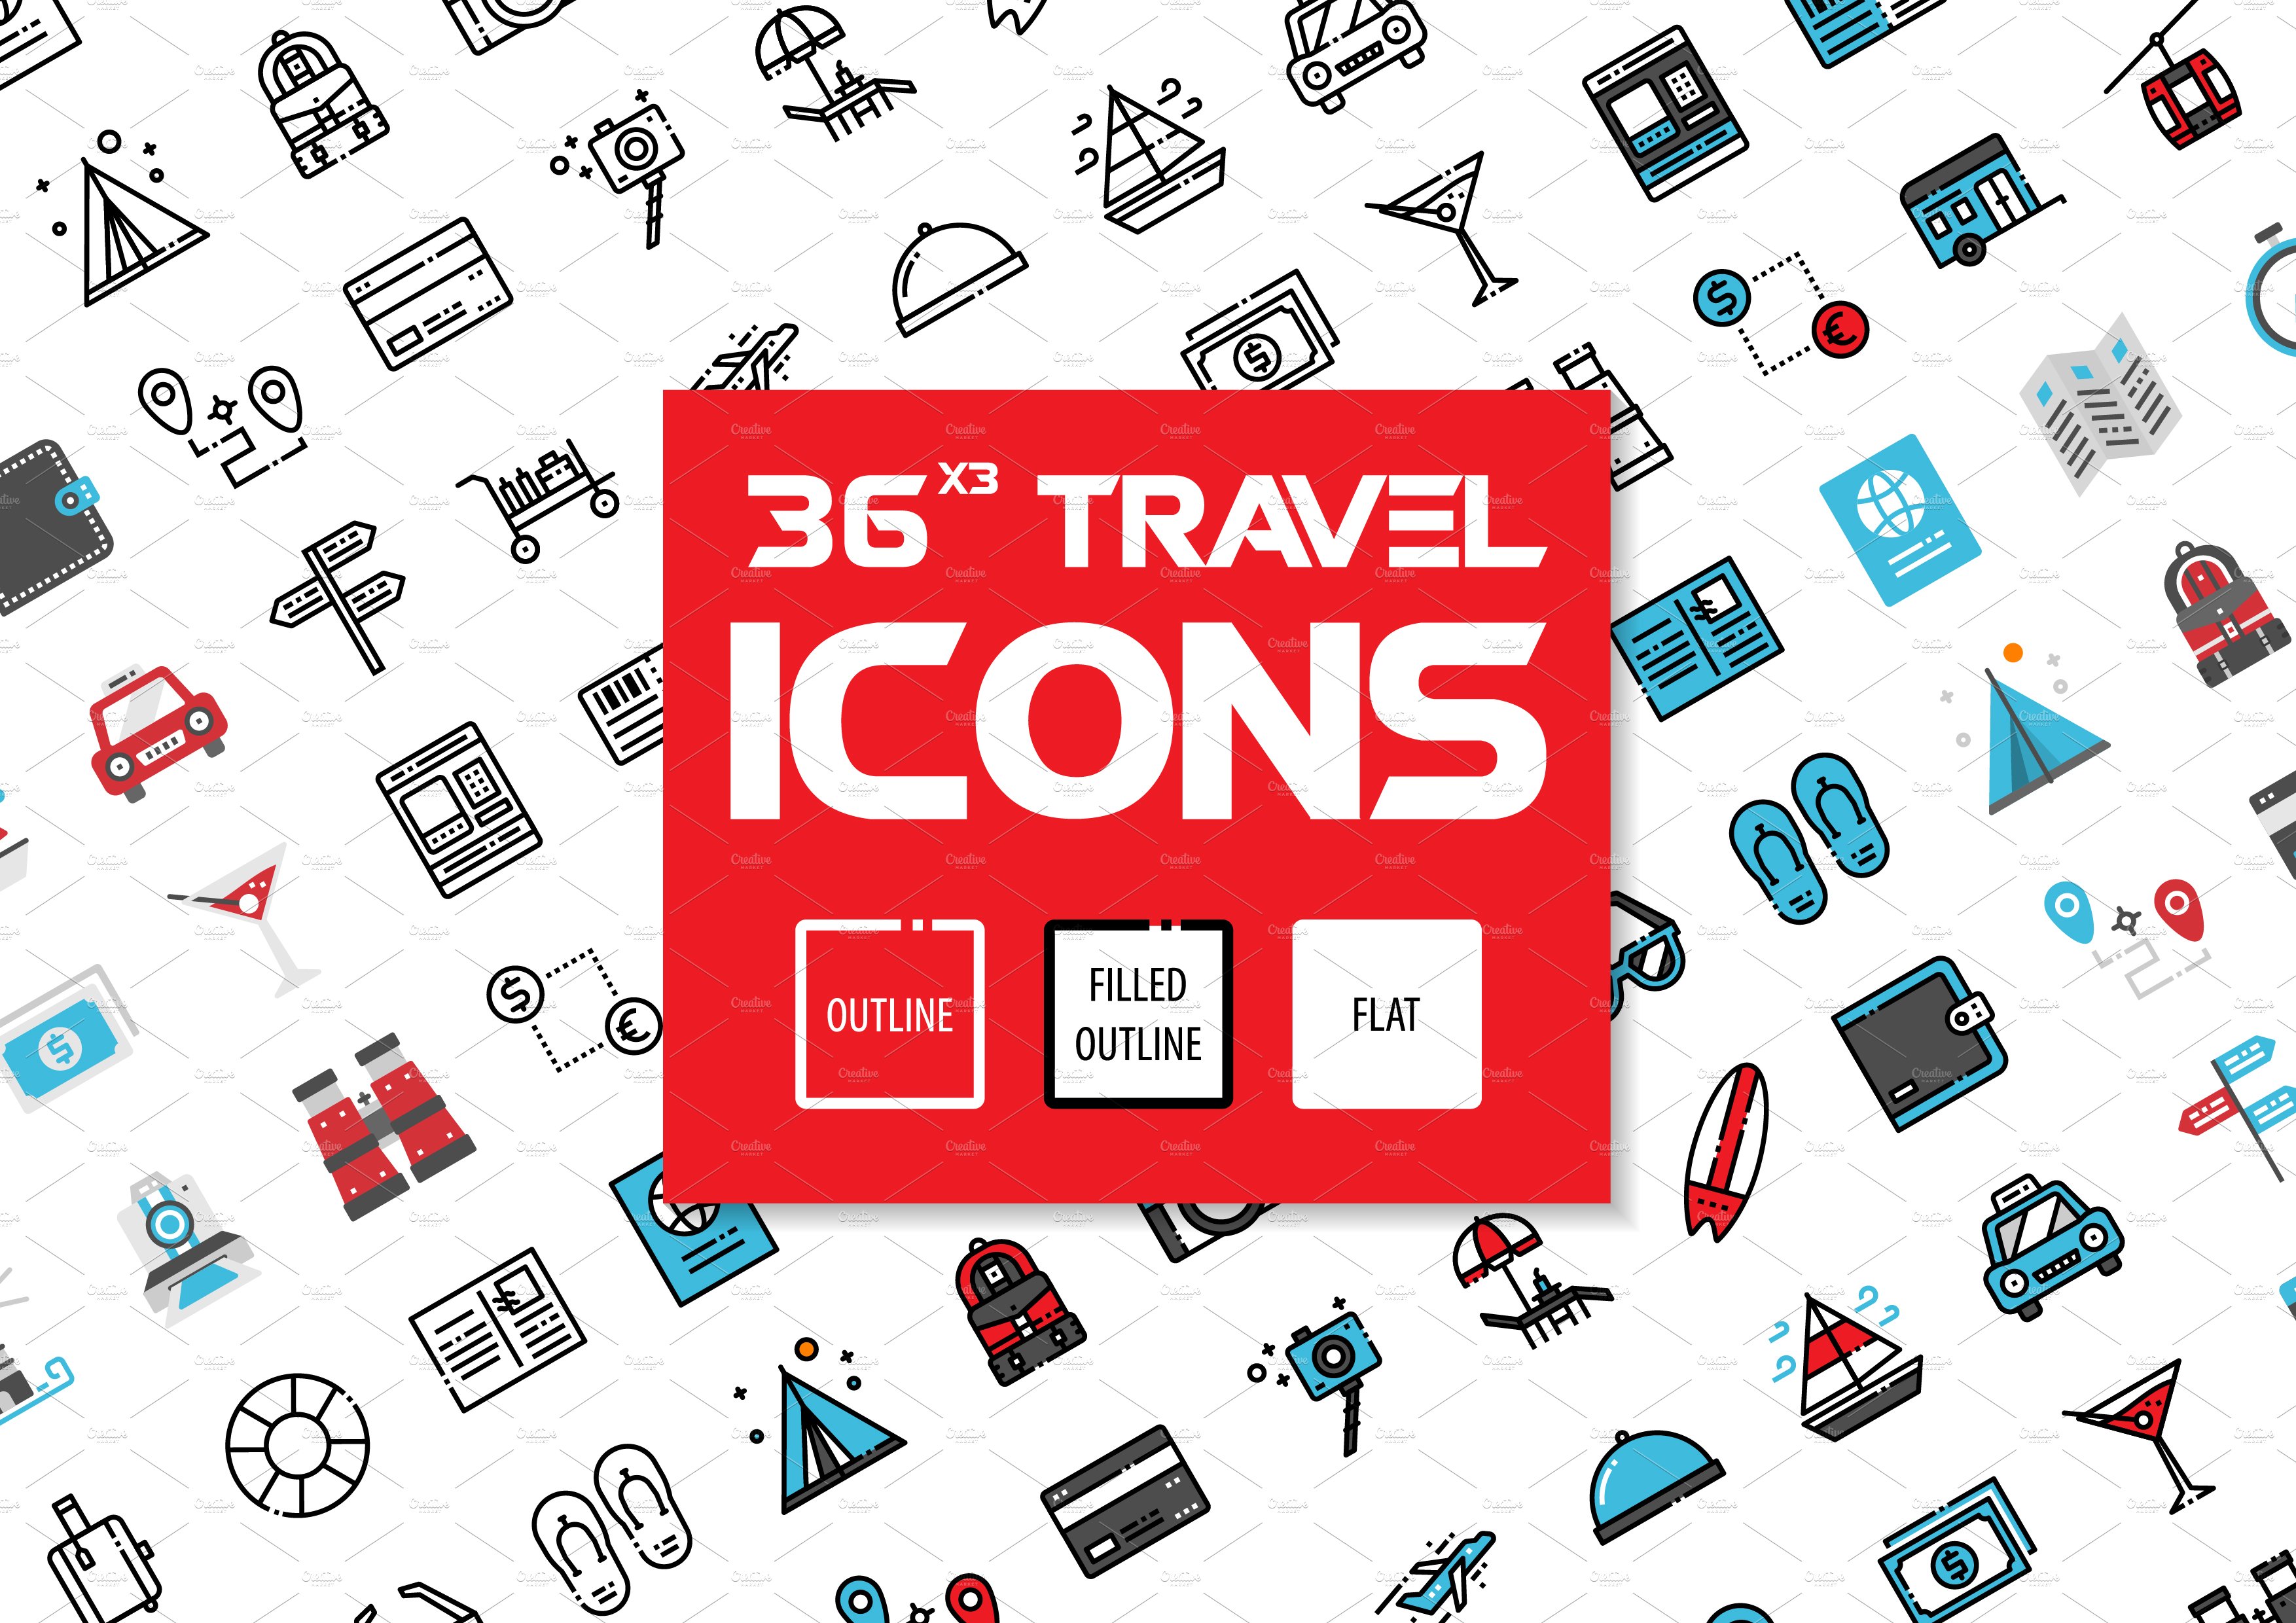 36x3 Travel icons cover image.